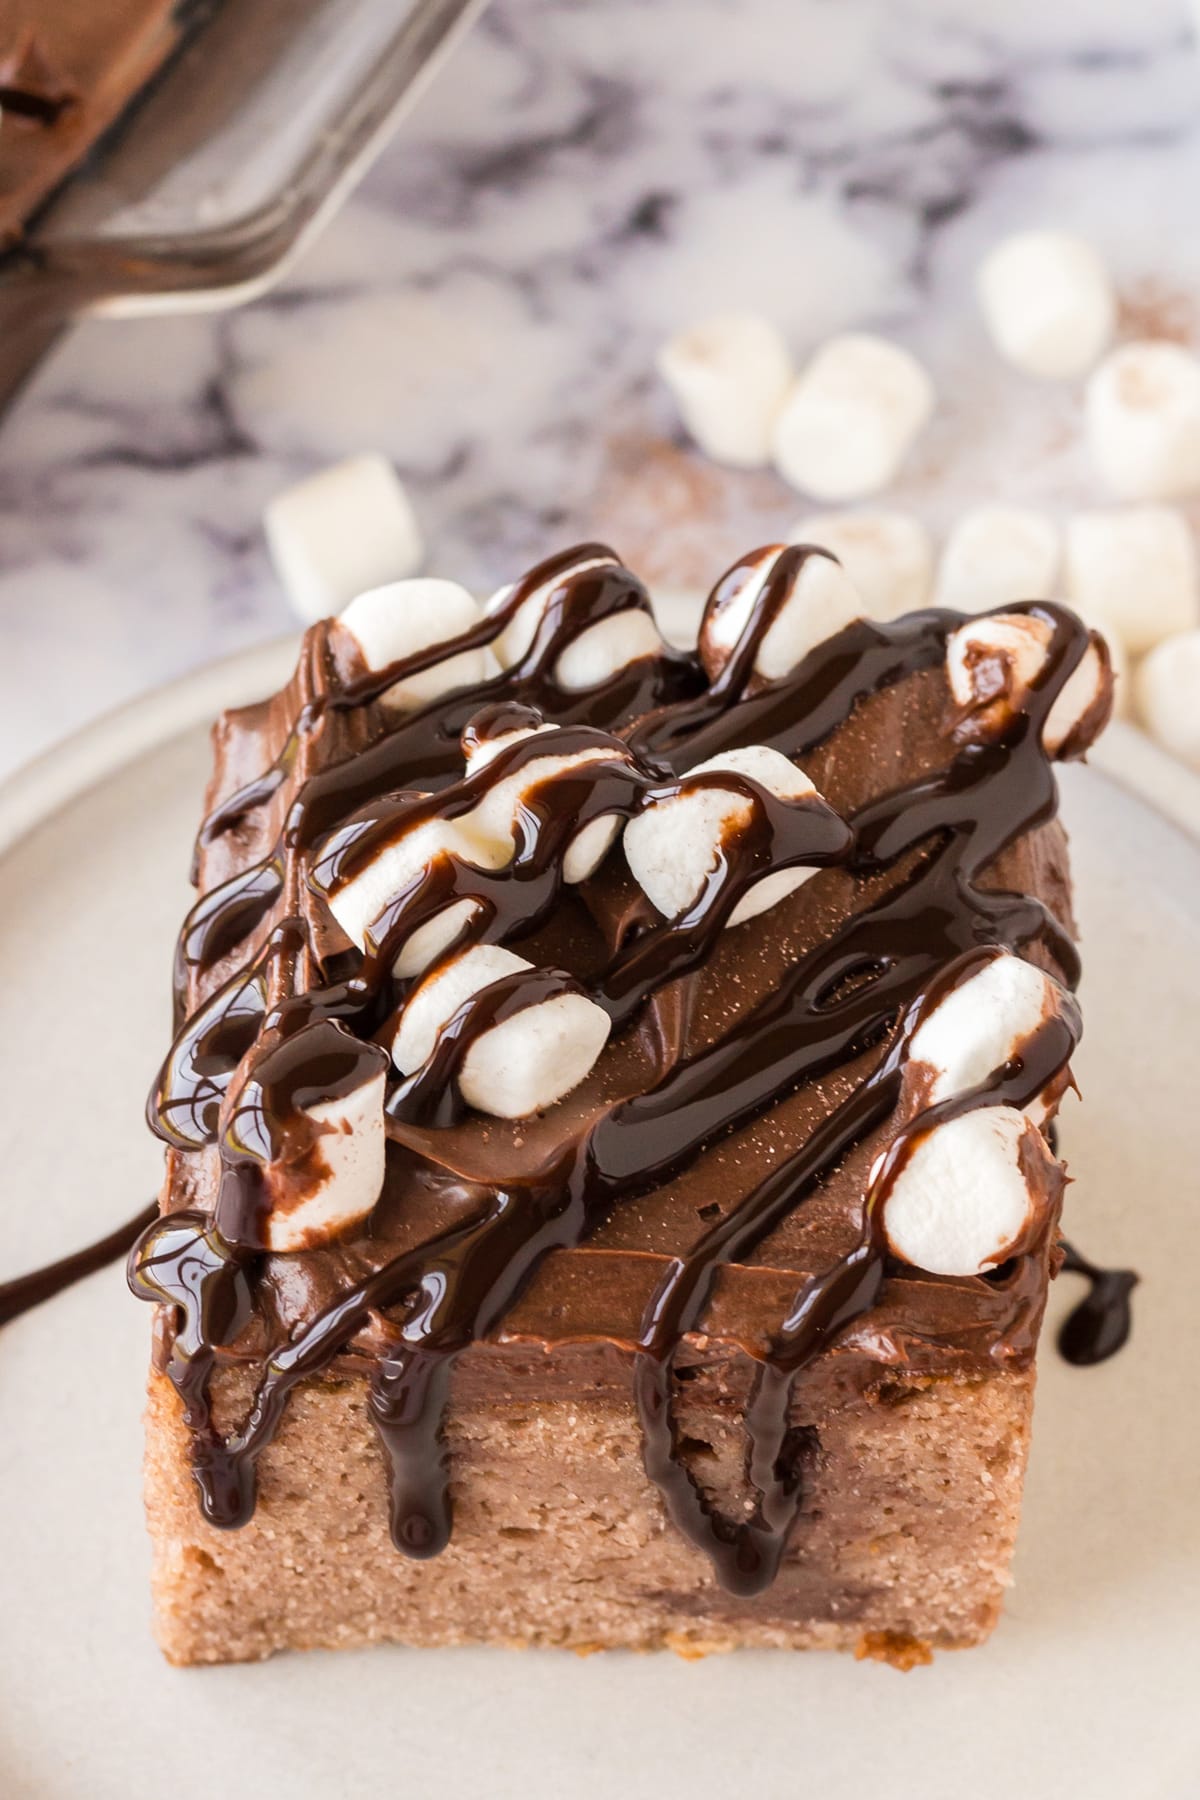 A piece of Hot Chocolate Poke Cake with marshmallows on top.